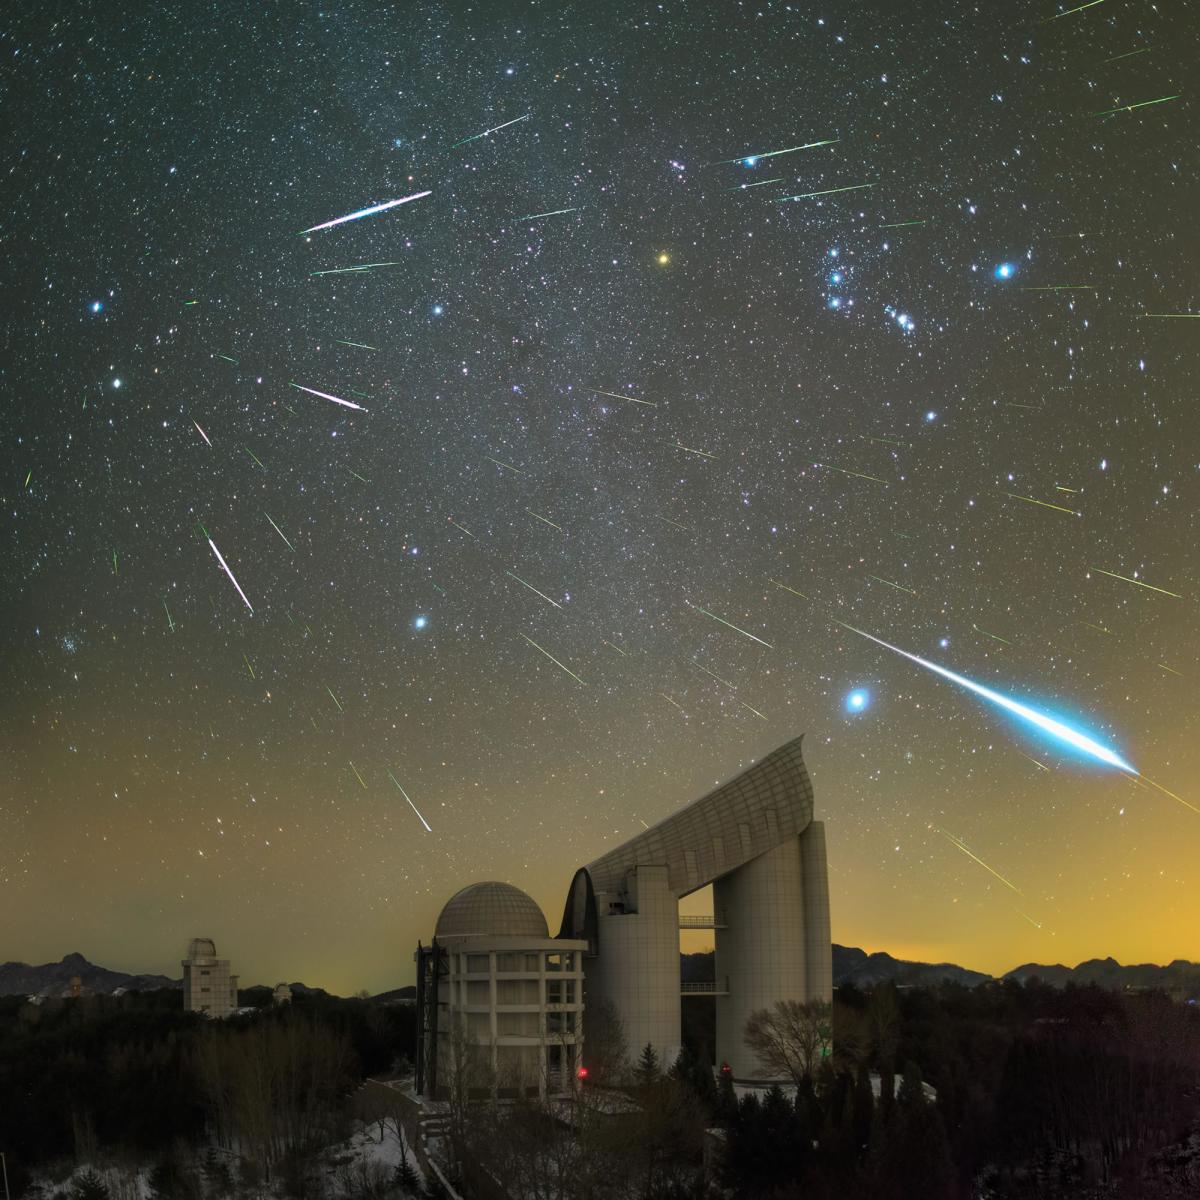 Image of meteor shower with around 30 meteors in the sky over a large observatory telescope